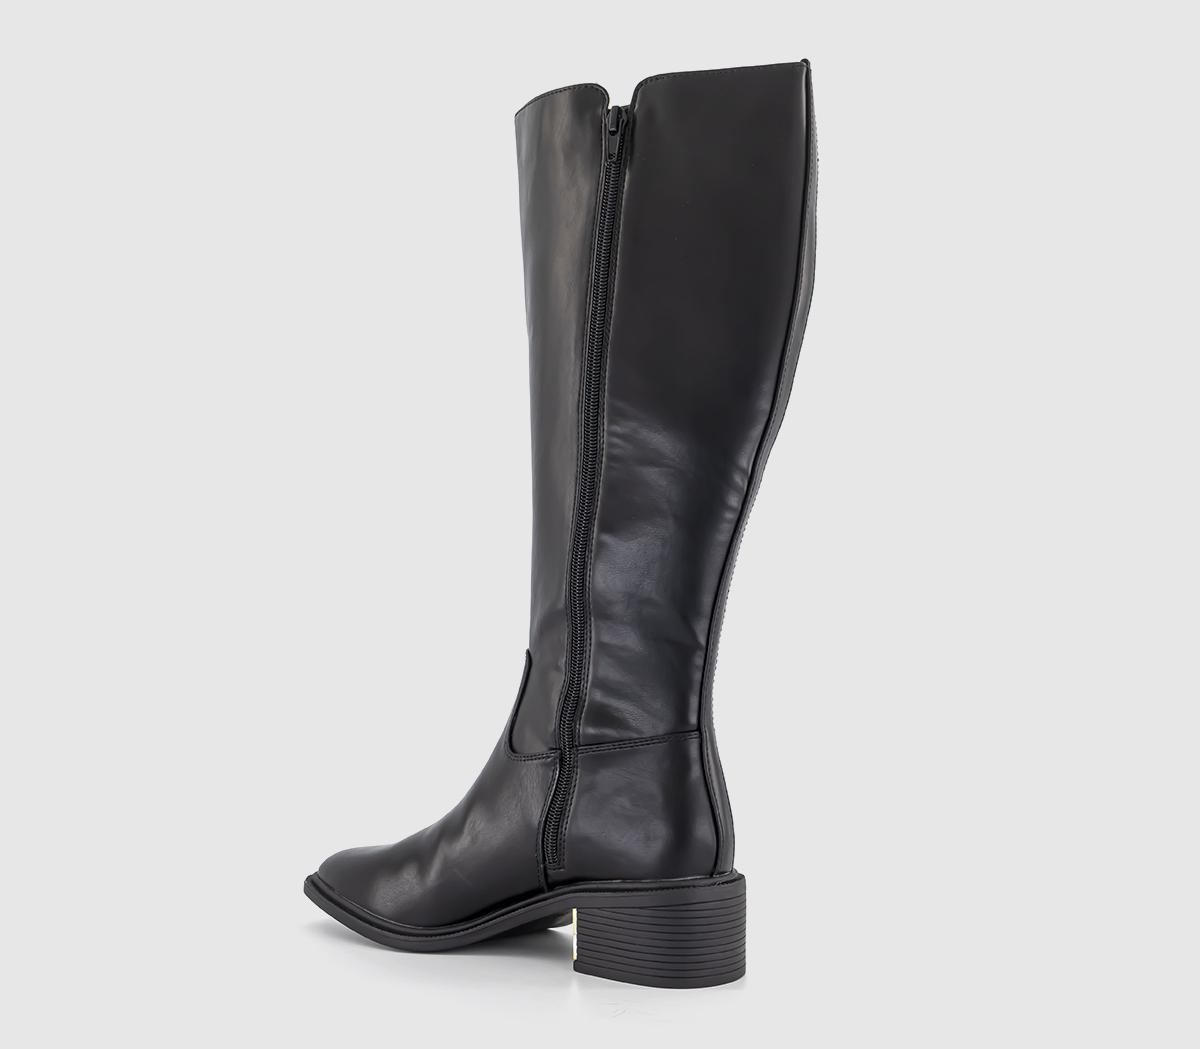 OFFICE Karmen Gold Hardware Riding Boots Black - Knee High Boots